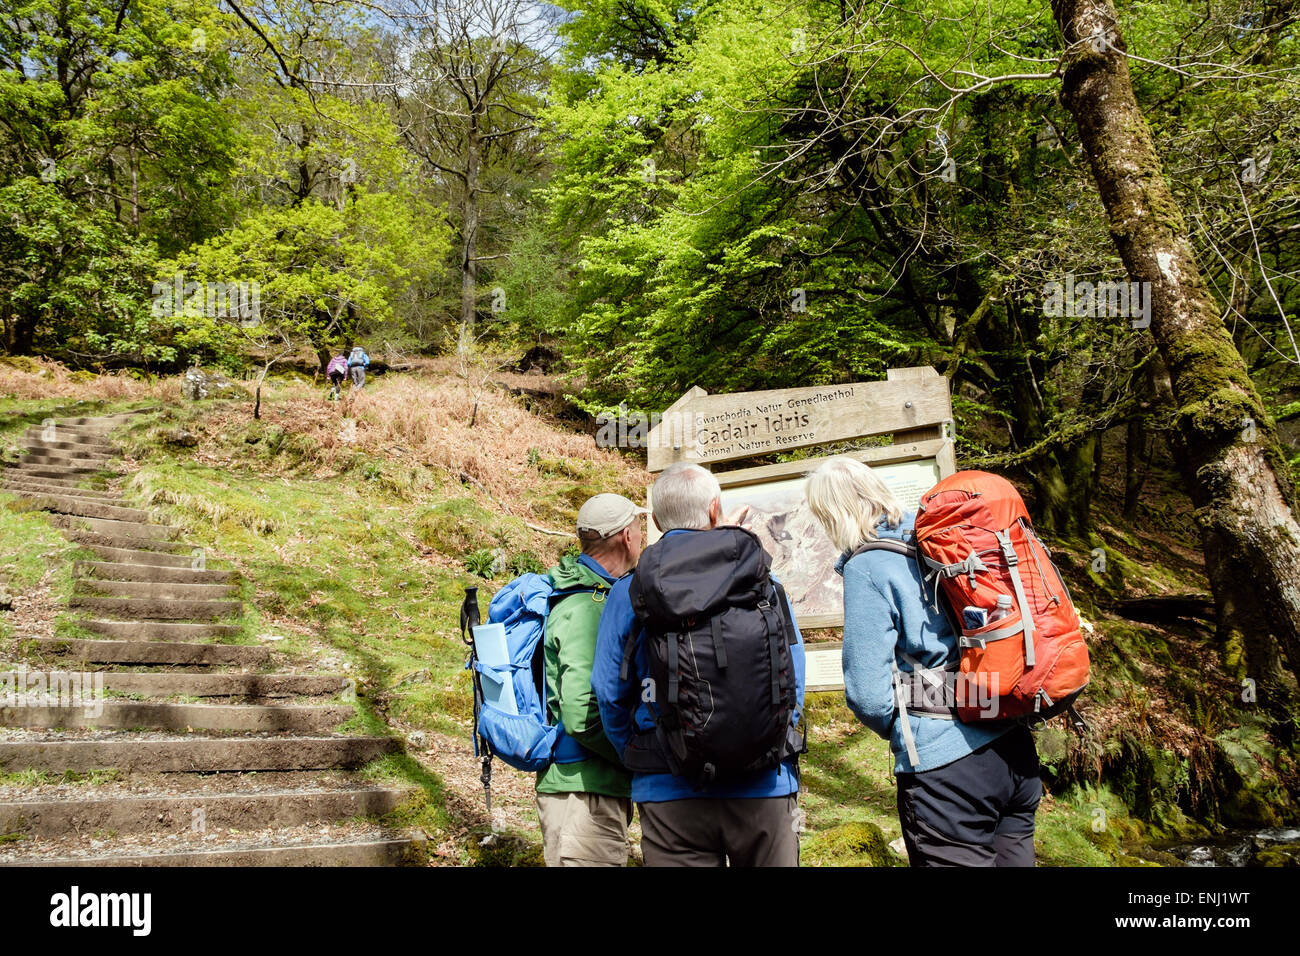 Hikers looking at information with map at start of Minffordd Path through woodland to Cadair Idris (Cader Idris) in National Nature Reserve Wales UK Stock Photo